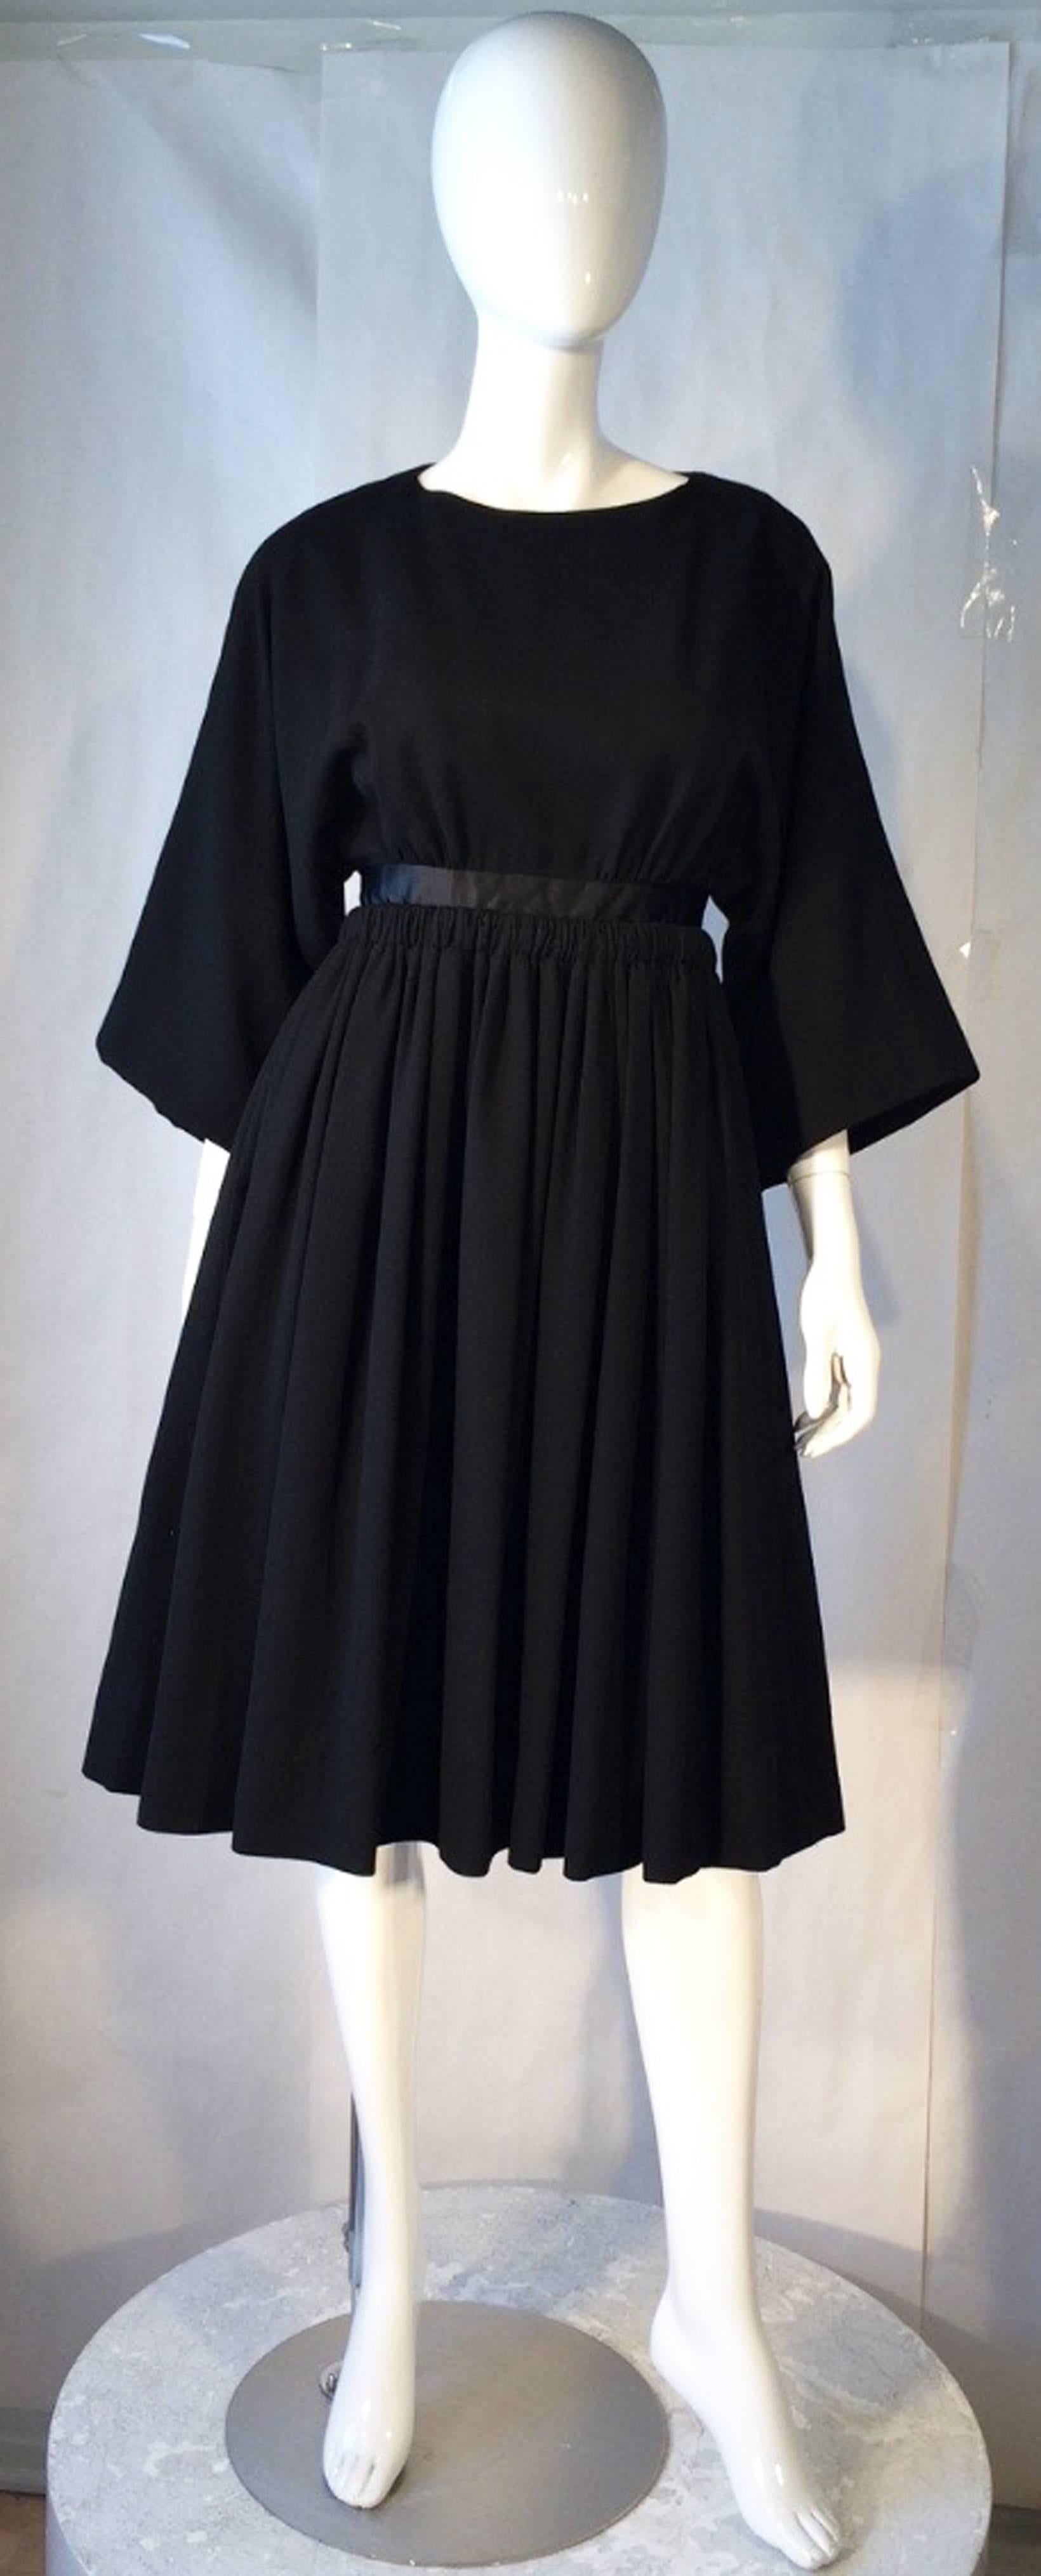 A fine and rare vintage James Galanos cocktail dress. Item sourced directly from original owner and purchased, 1953 (Blum's-Vogue, Chicago). Black wool crepe item features a full pleated skirt, nipped waist with a jet silk waistband and full